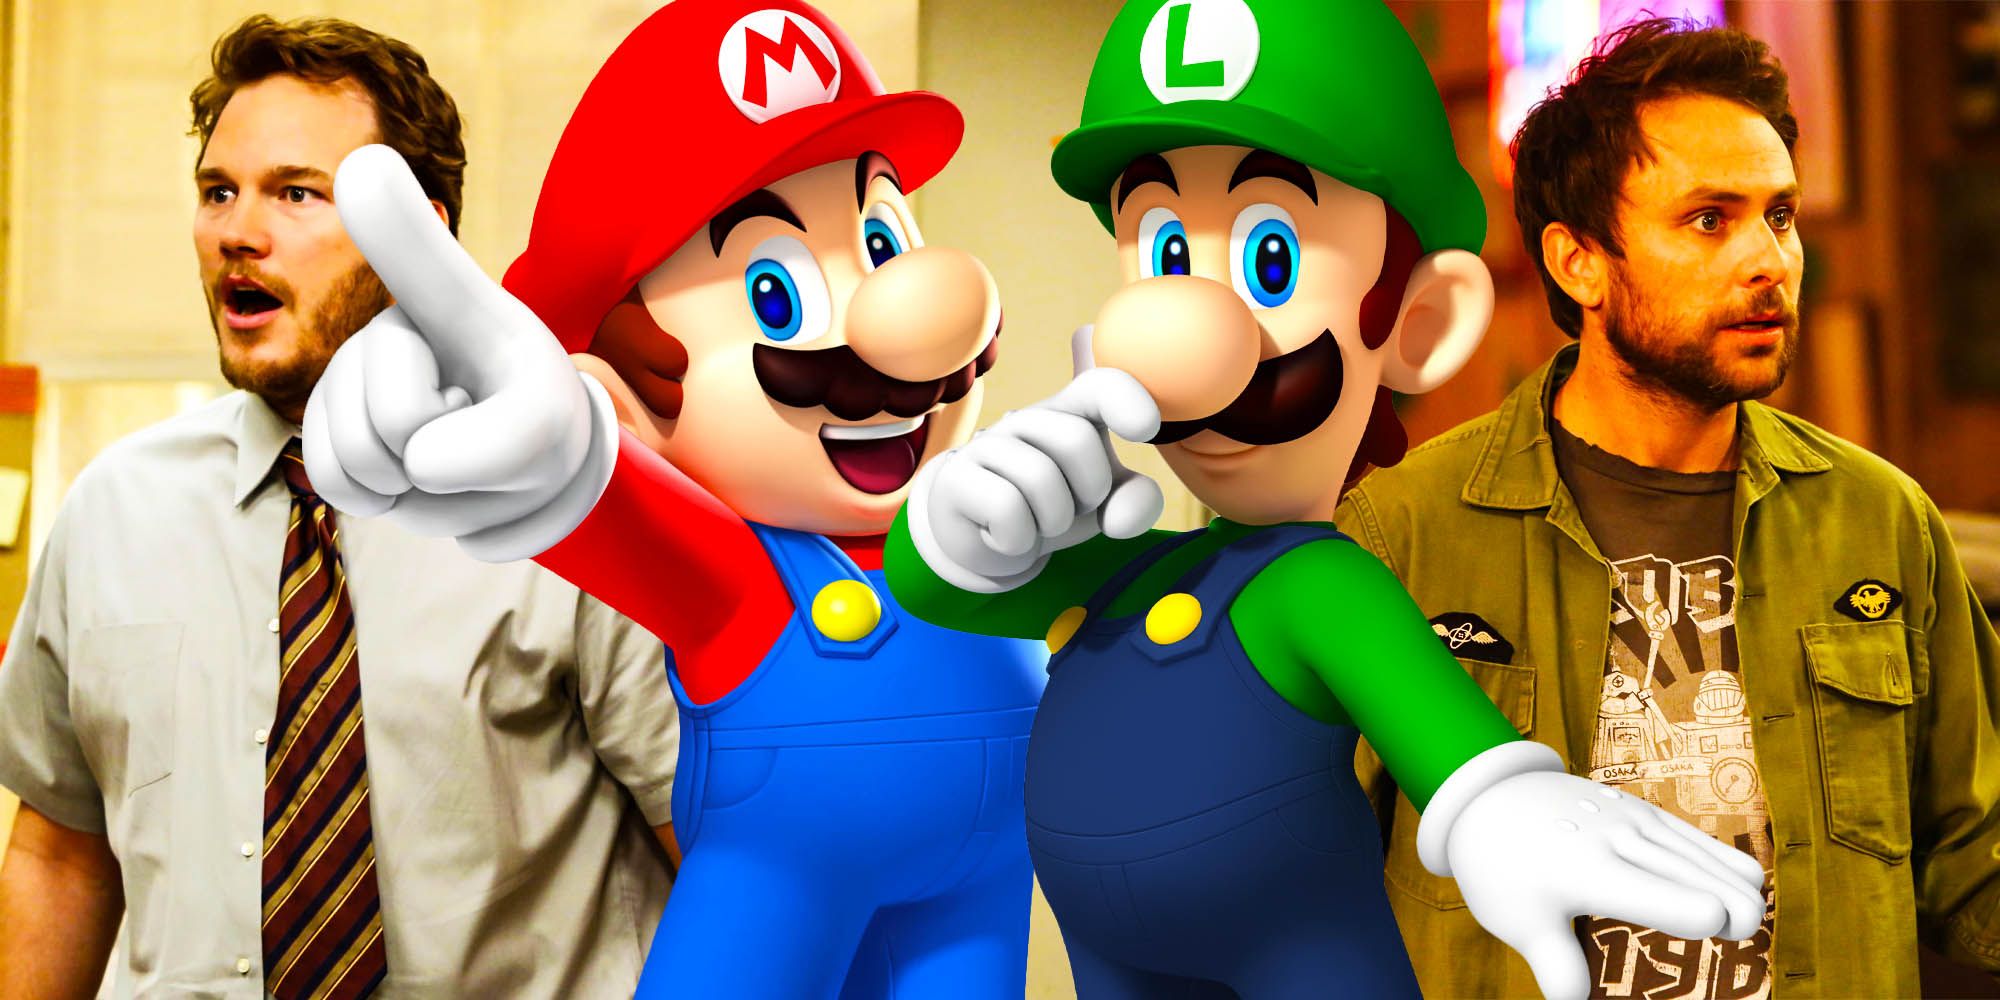 What Super Mario Bros Cast Reveals About The Movie